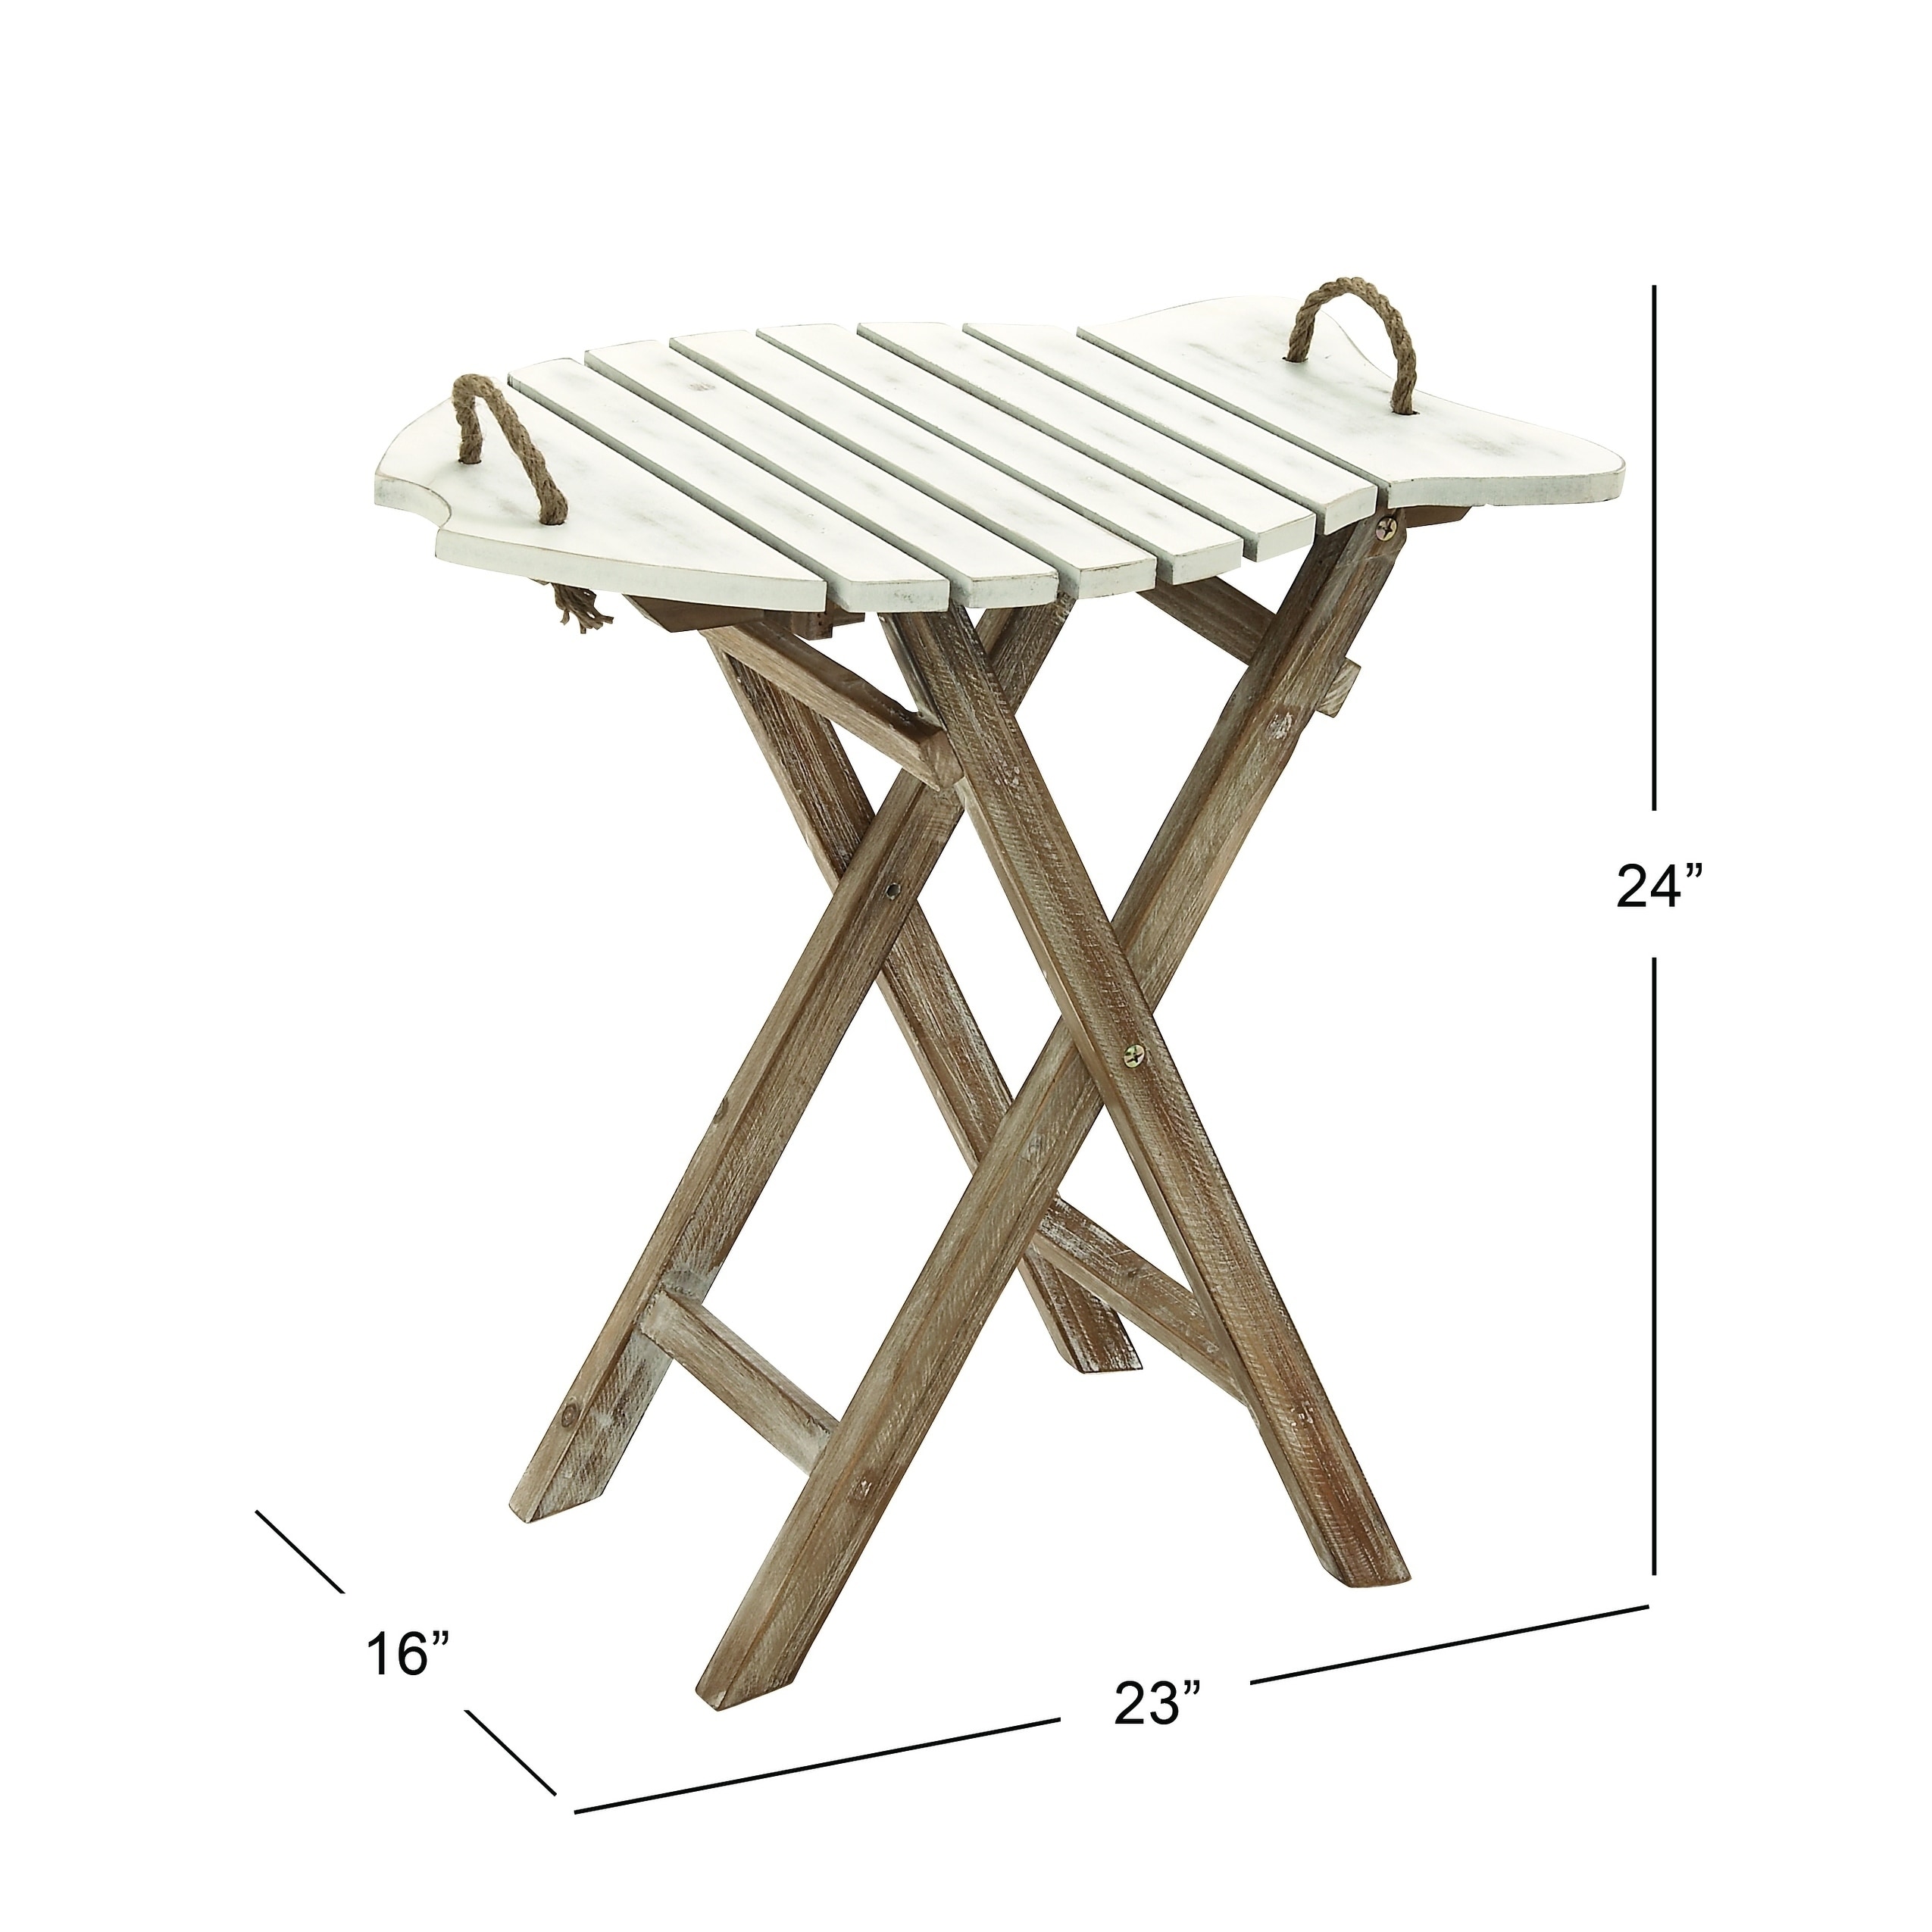 Details about   Wooden folding fish shaped table with distressed finish